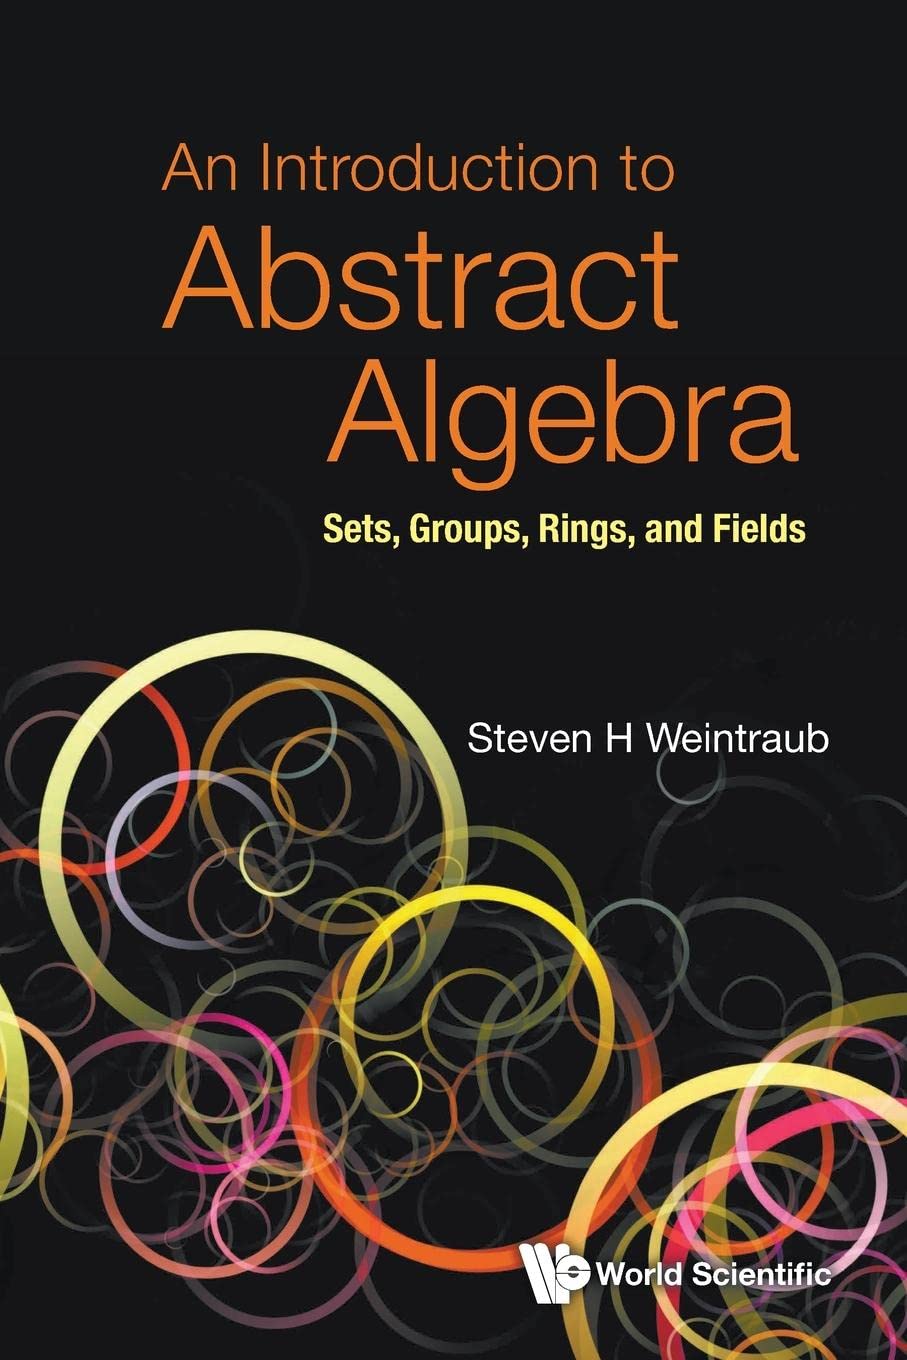 abstract algebra - Group ring confusion - Mathematics Stack Exchange